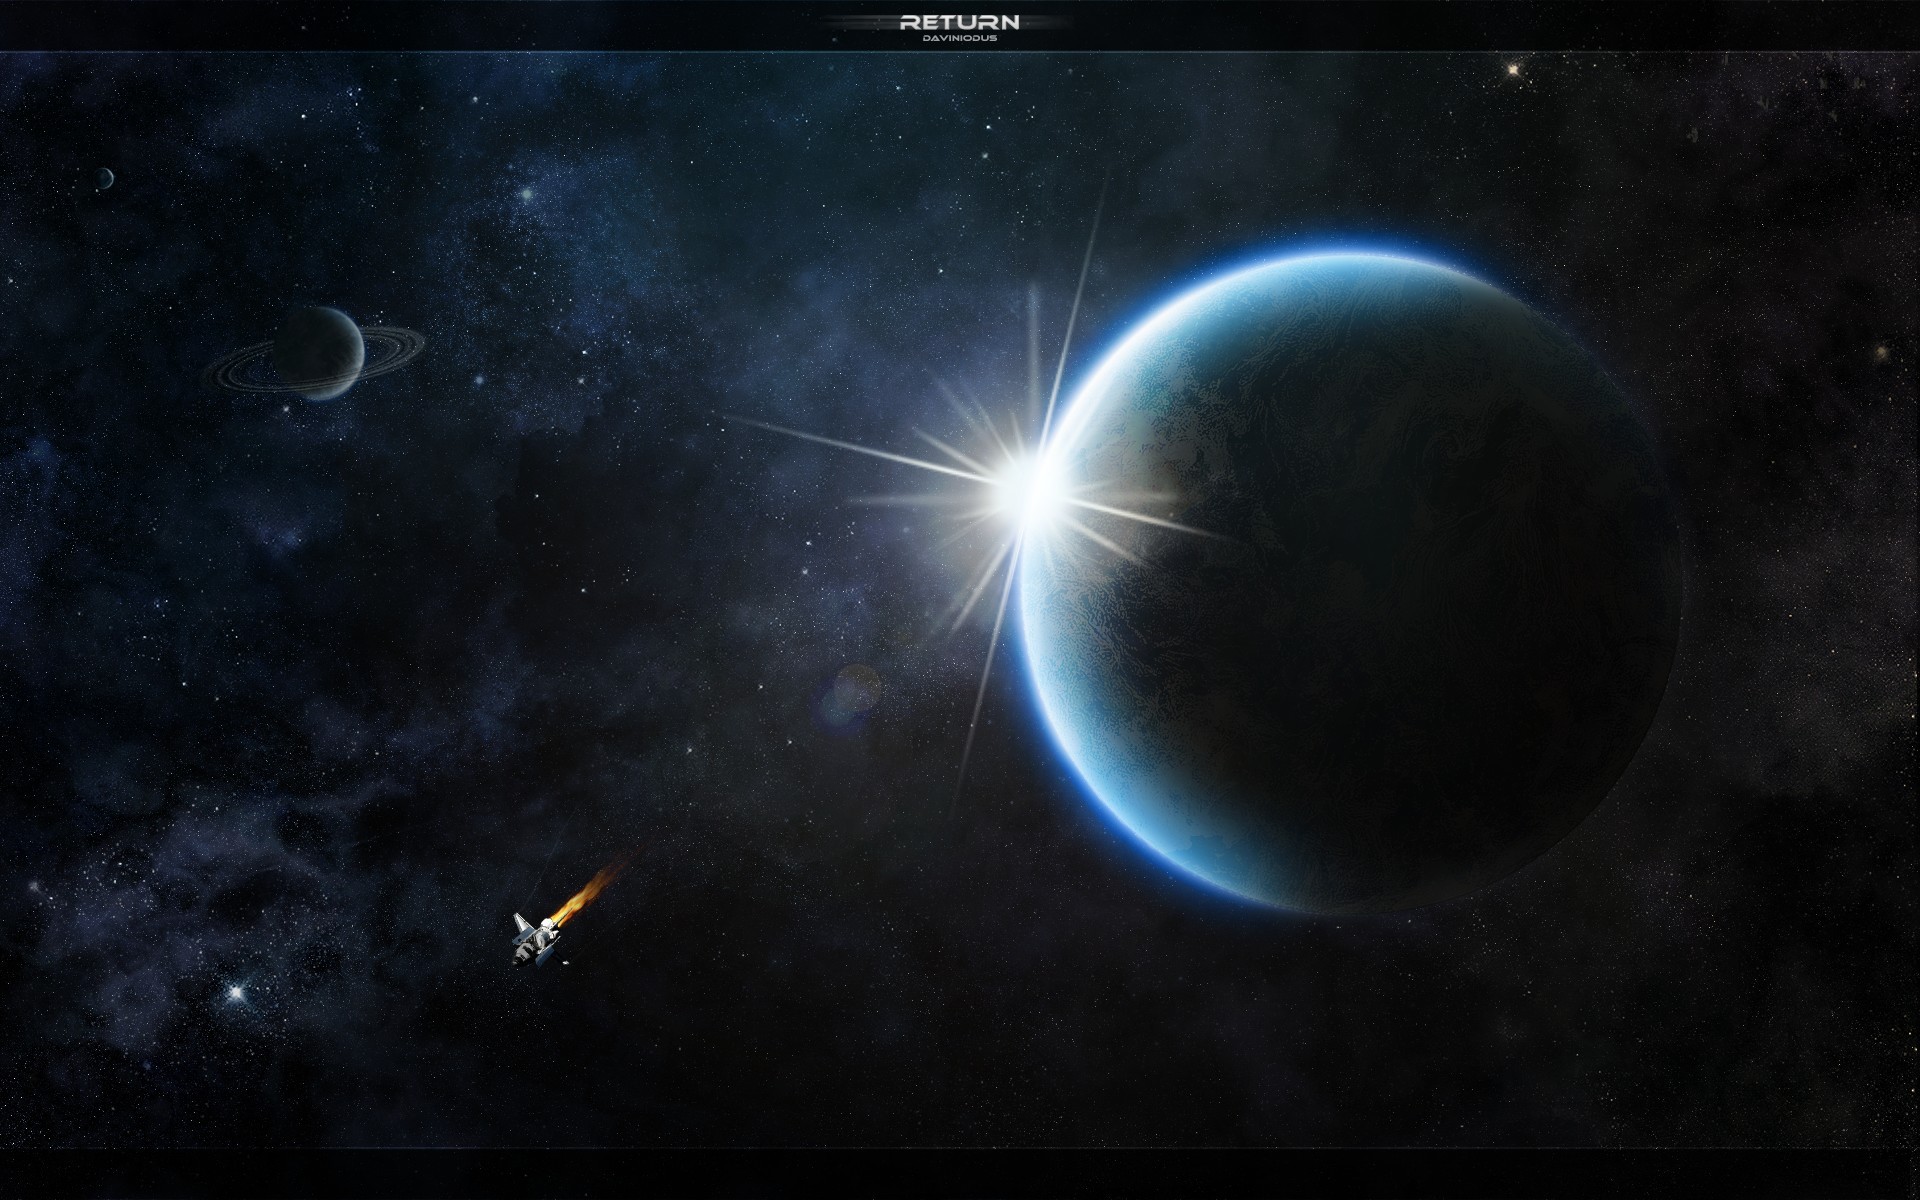 Download wallpapers download 1680x1050 science fiction wallpaper